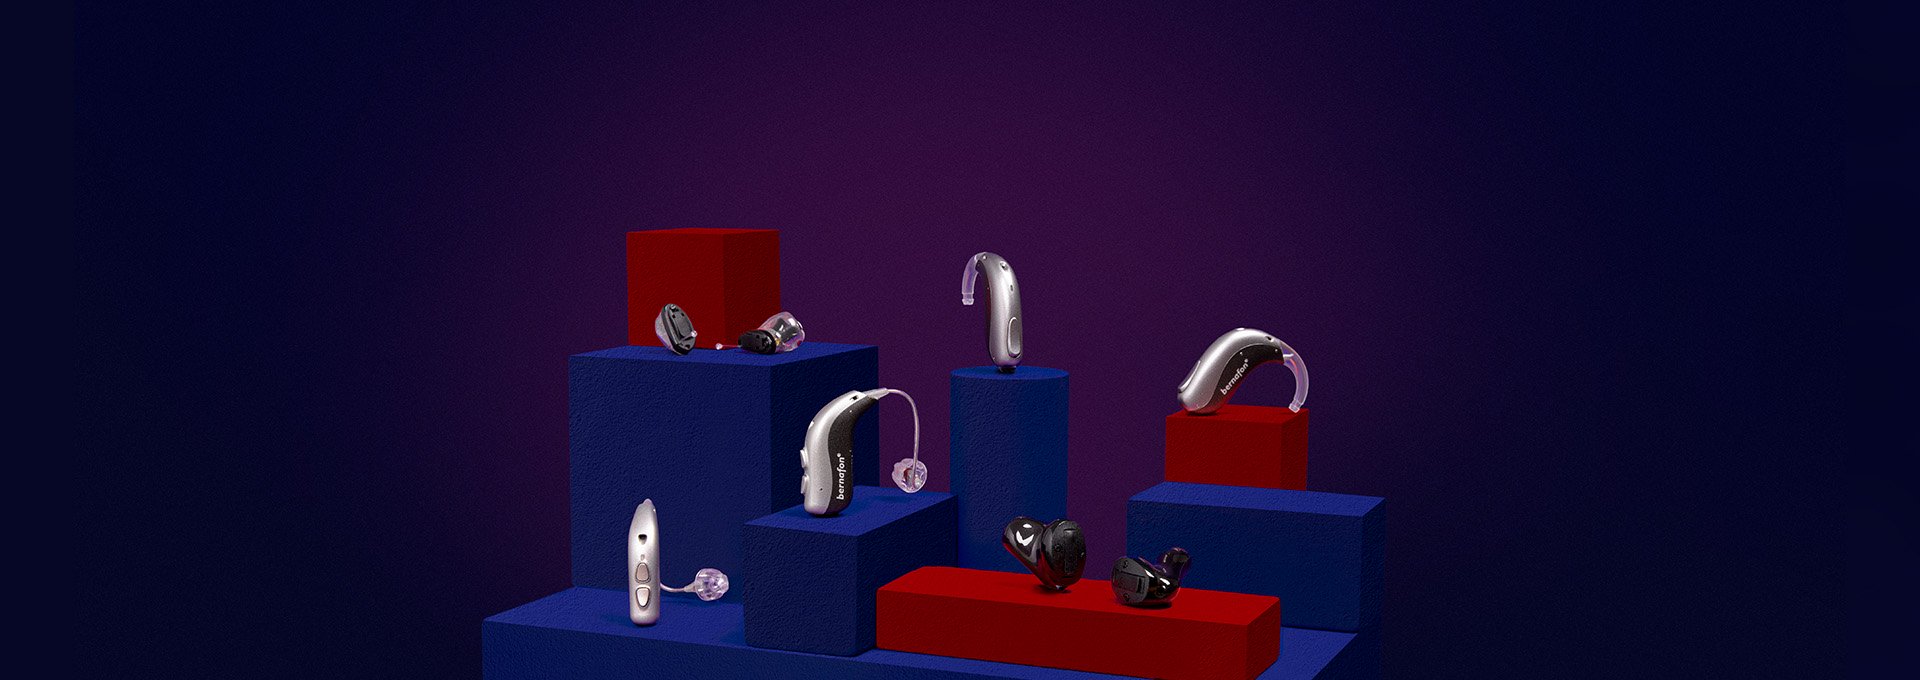 Bernafon Alpha hearing aids in 6 styles (IIC, ITC, miniRITE T (R), miniBTE T (R)) on red and blue cubes with dark background